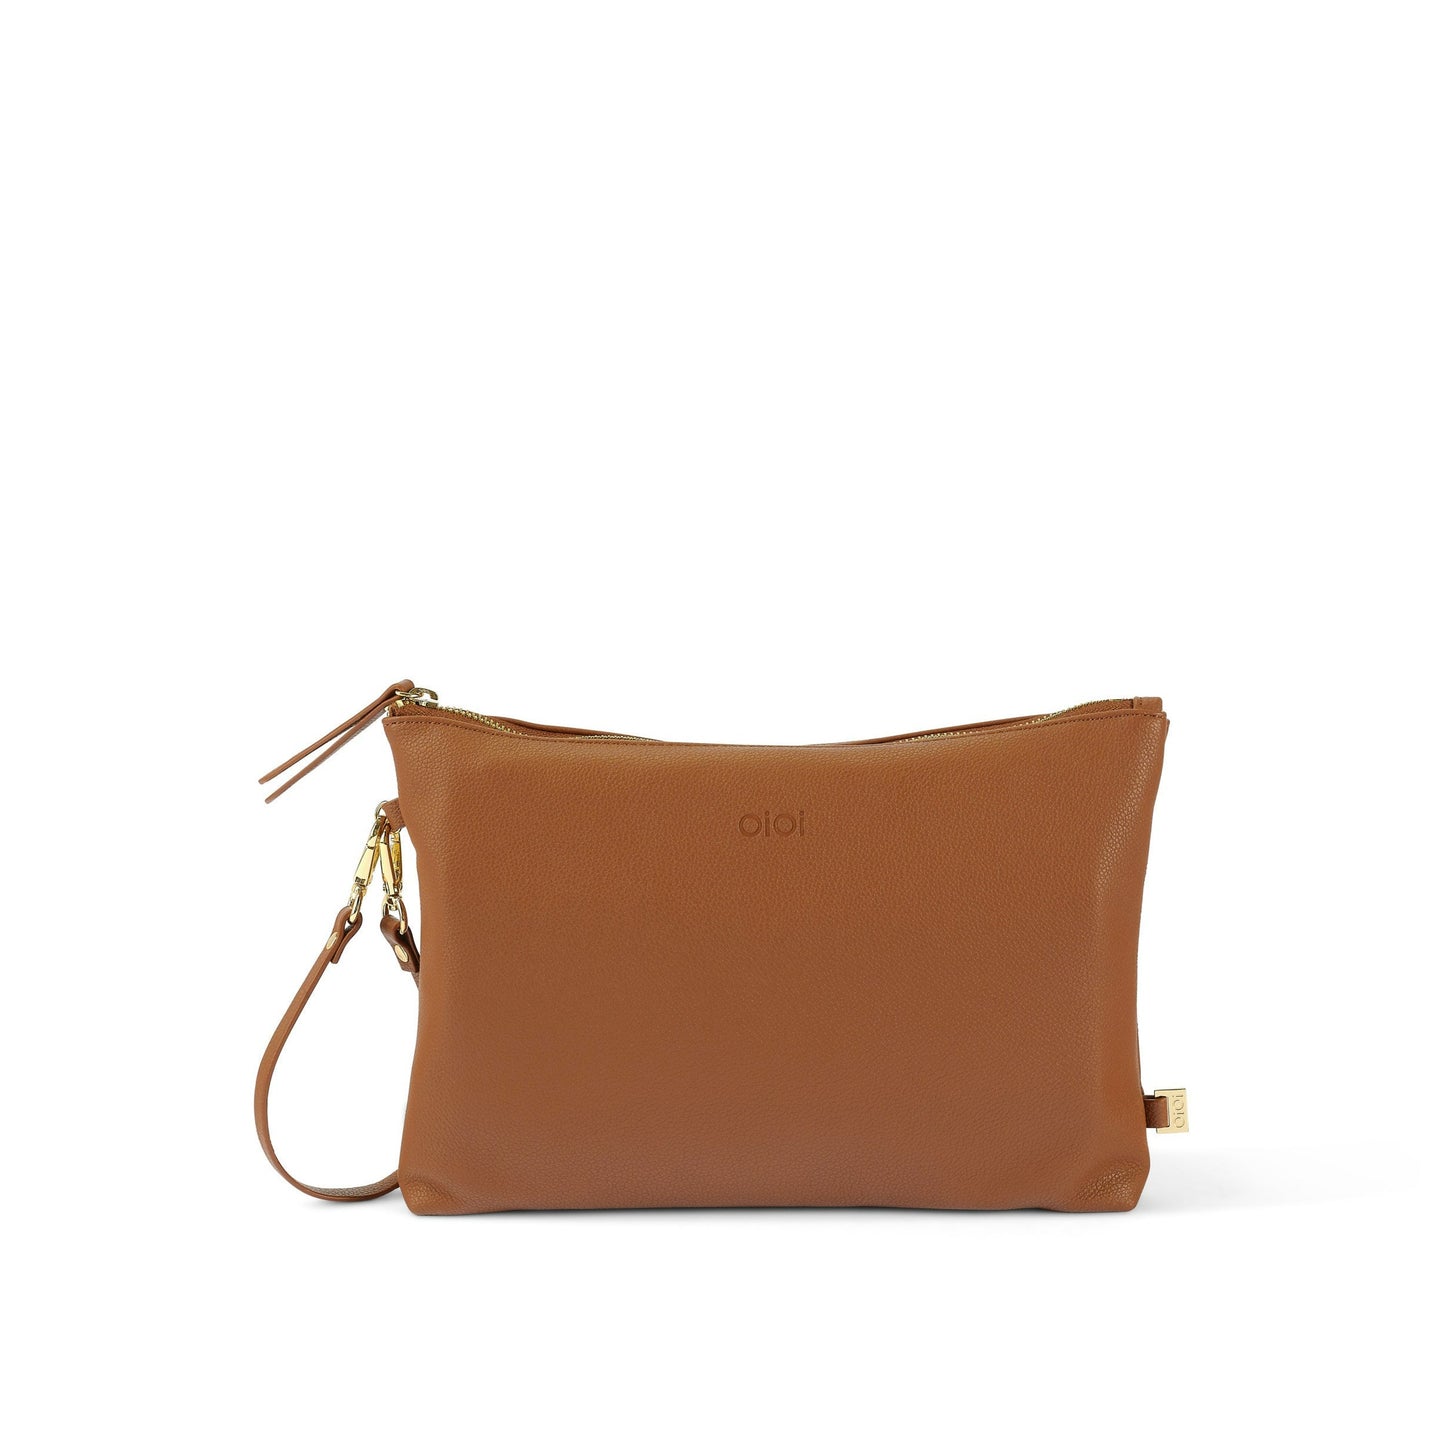 Diaper Changing Pouch - Chestnut Brown Vegan Leather